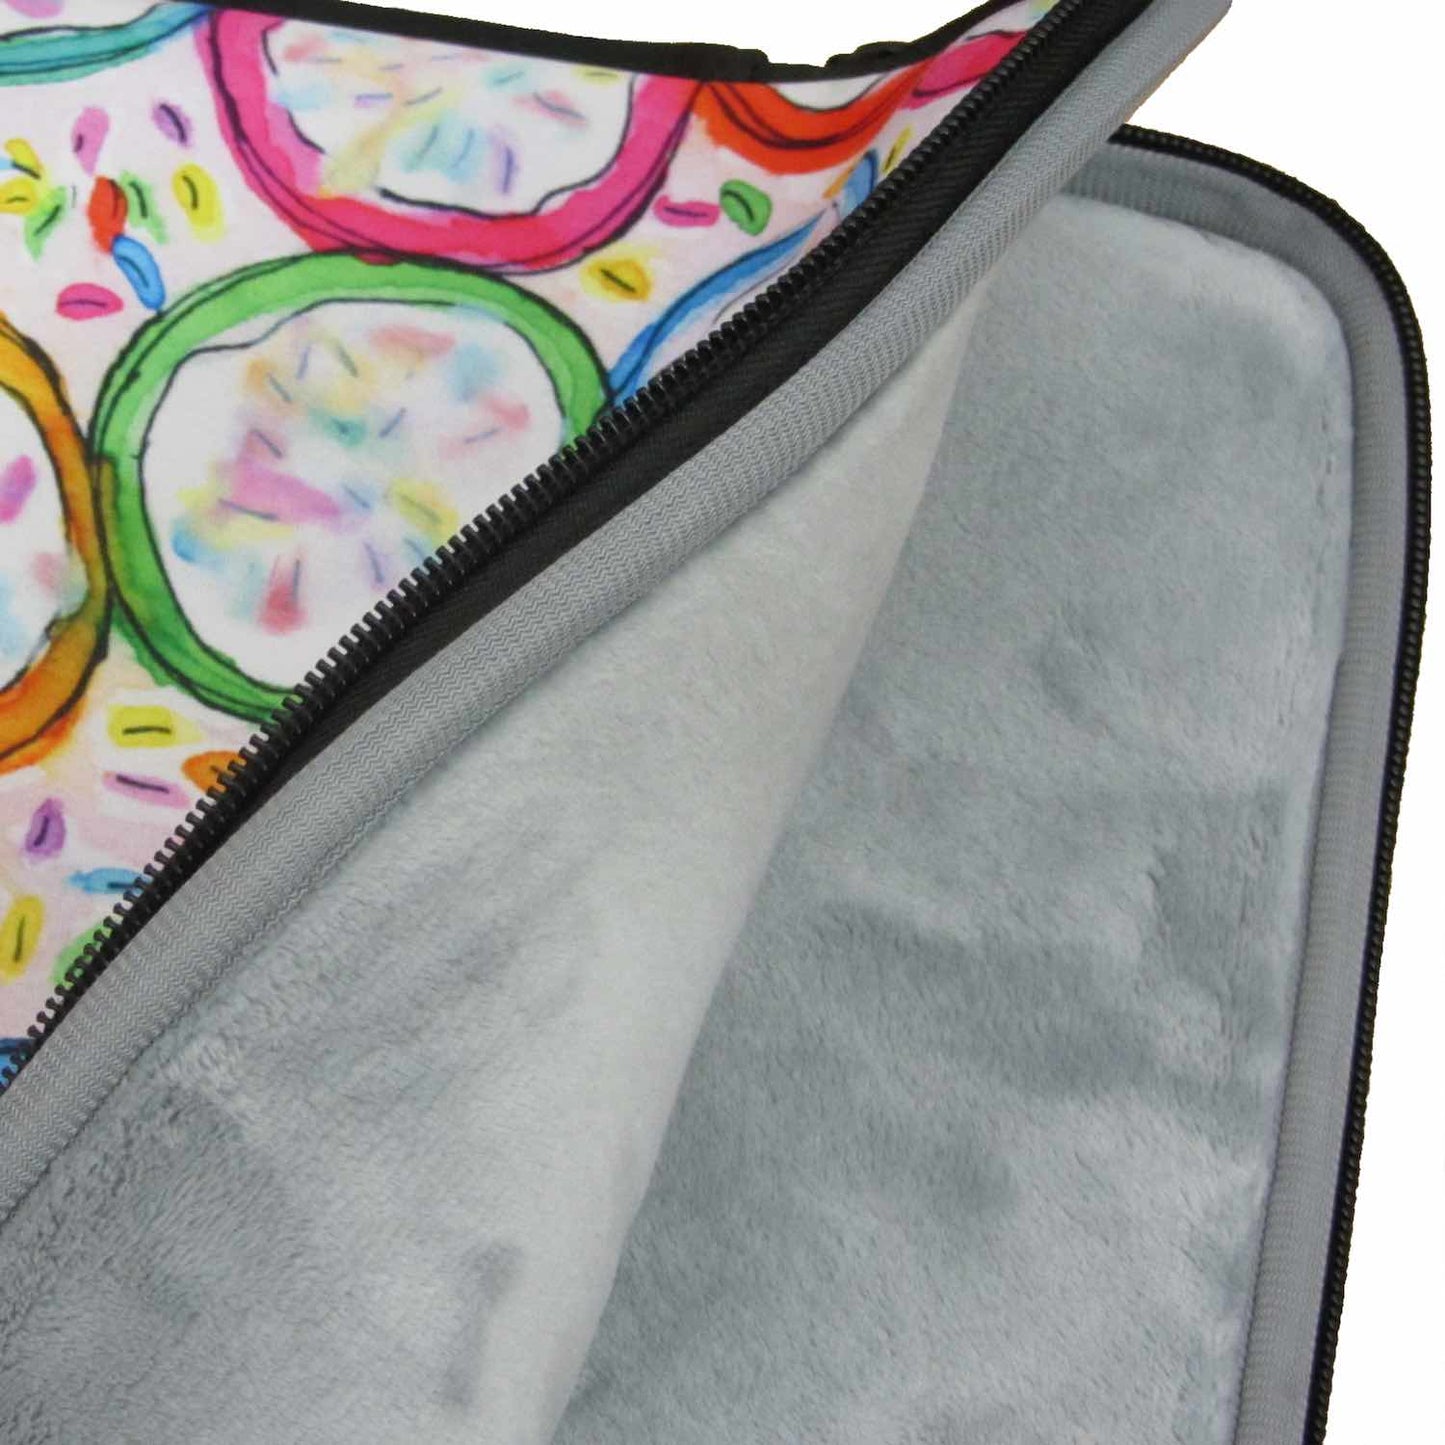 Graphic laptop case with rainbow-inspired multicolor print in Frosted Cookies. Detail of soft furry lining in gray color.